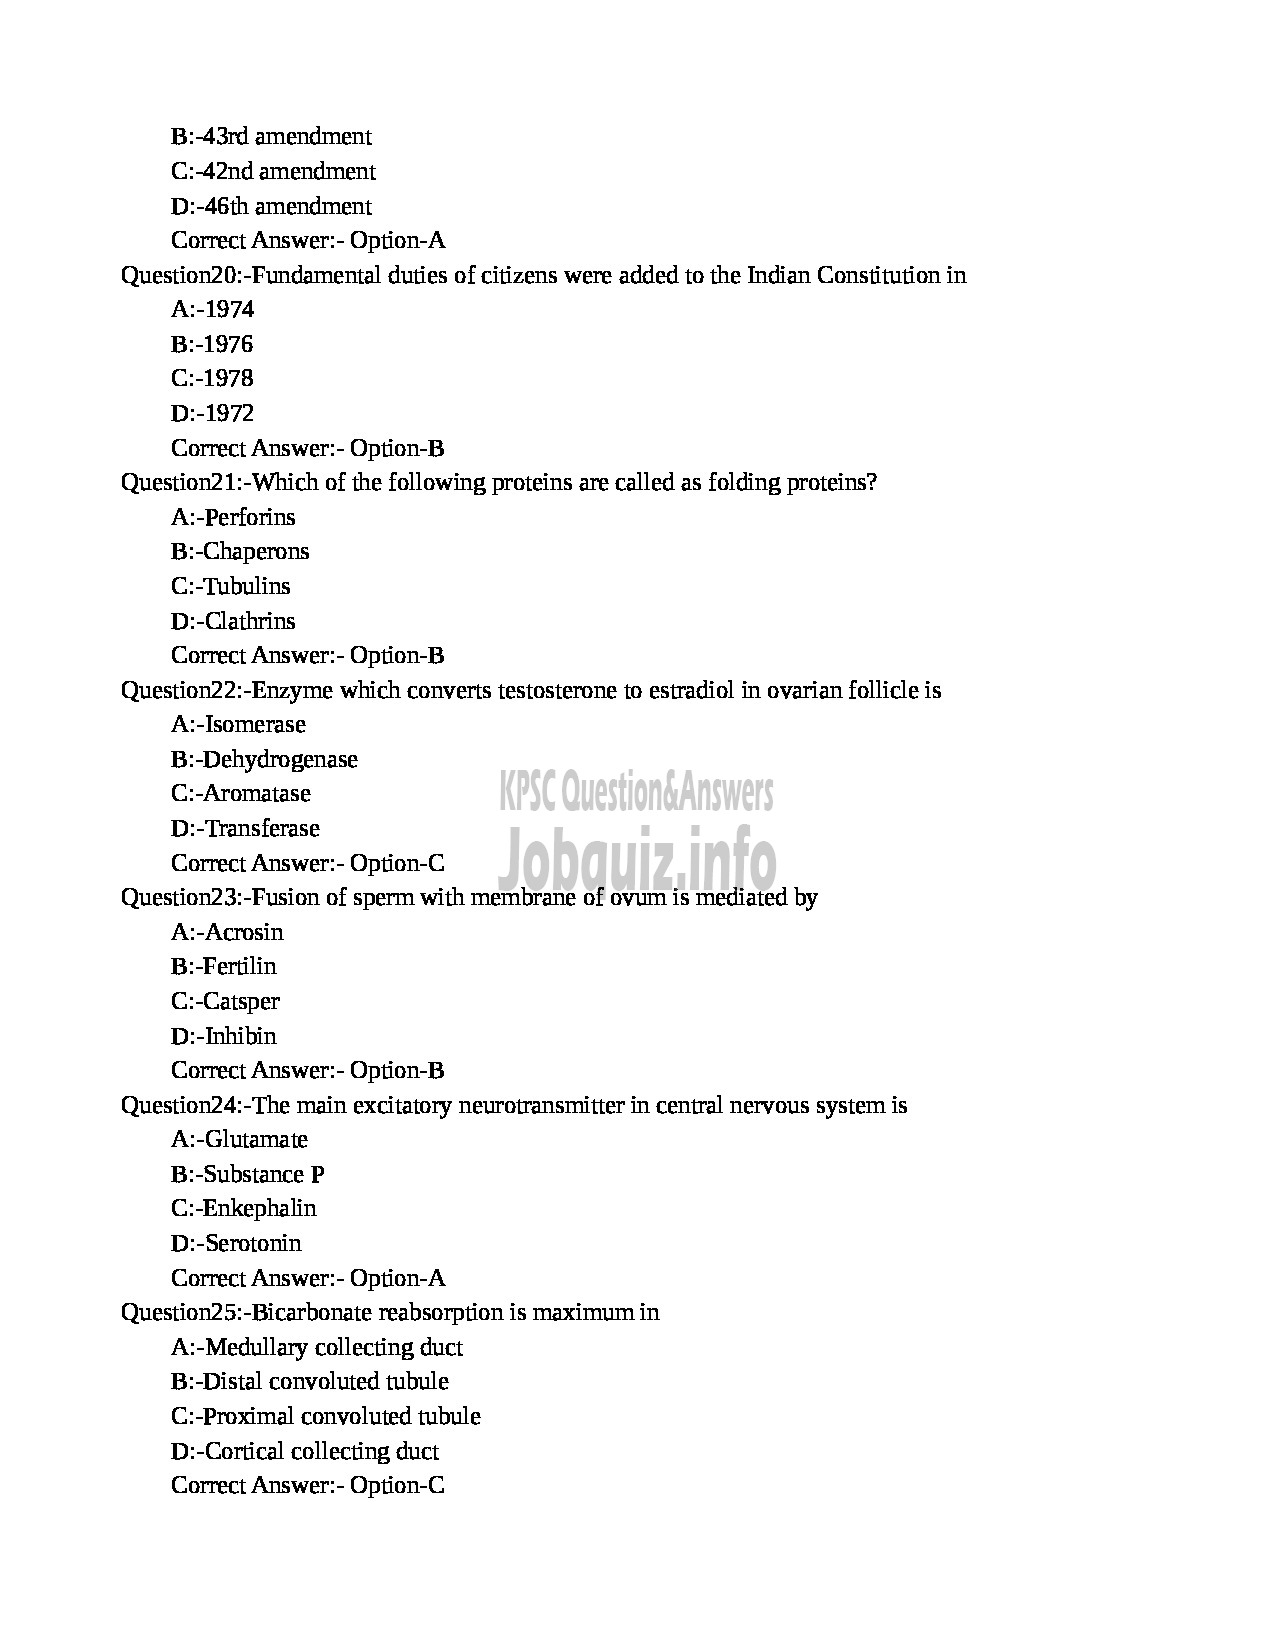 Kerala PSC Question Paper - Assistant Professor in physiology Medical Education-4